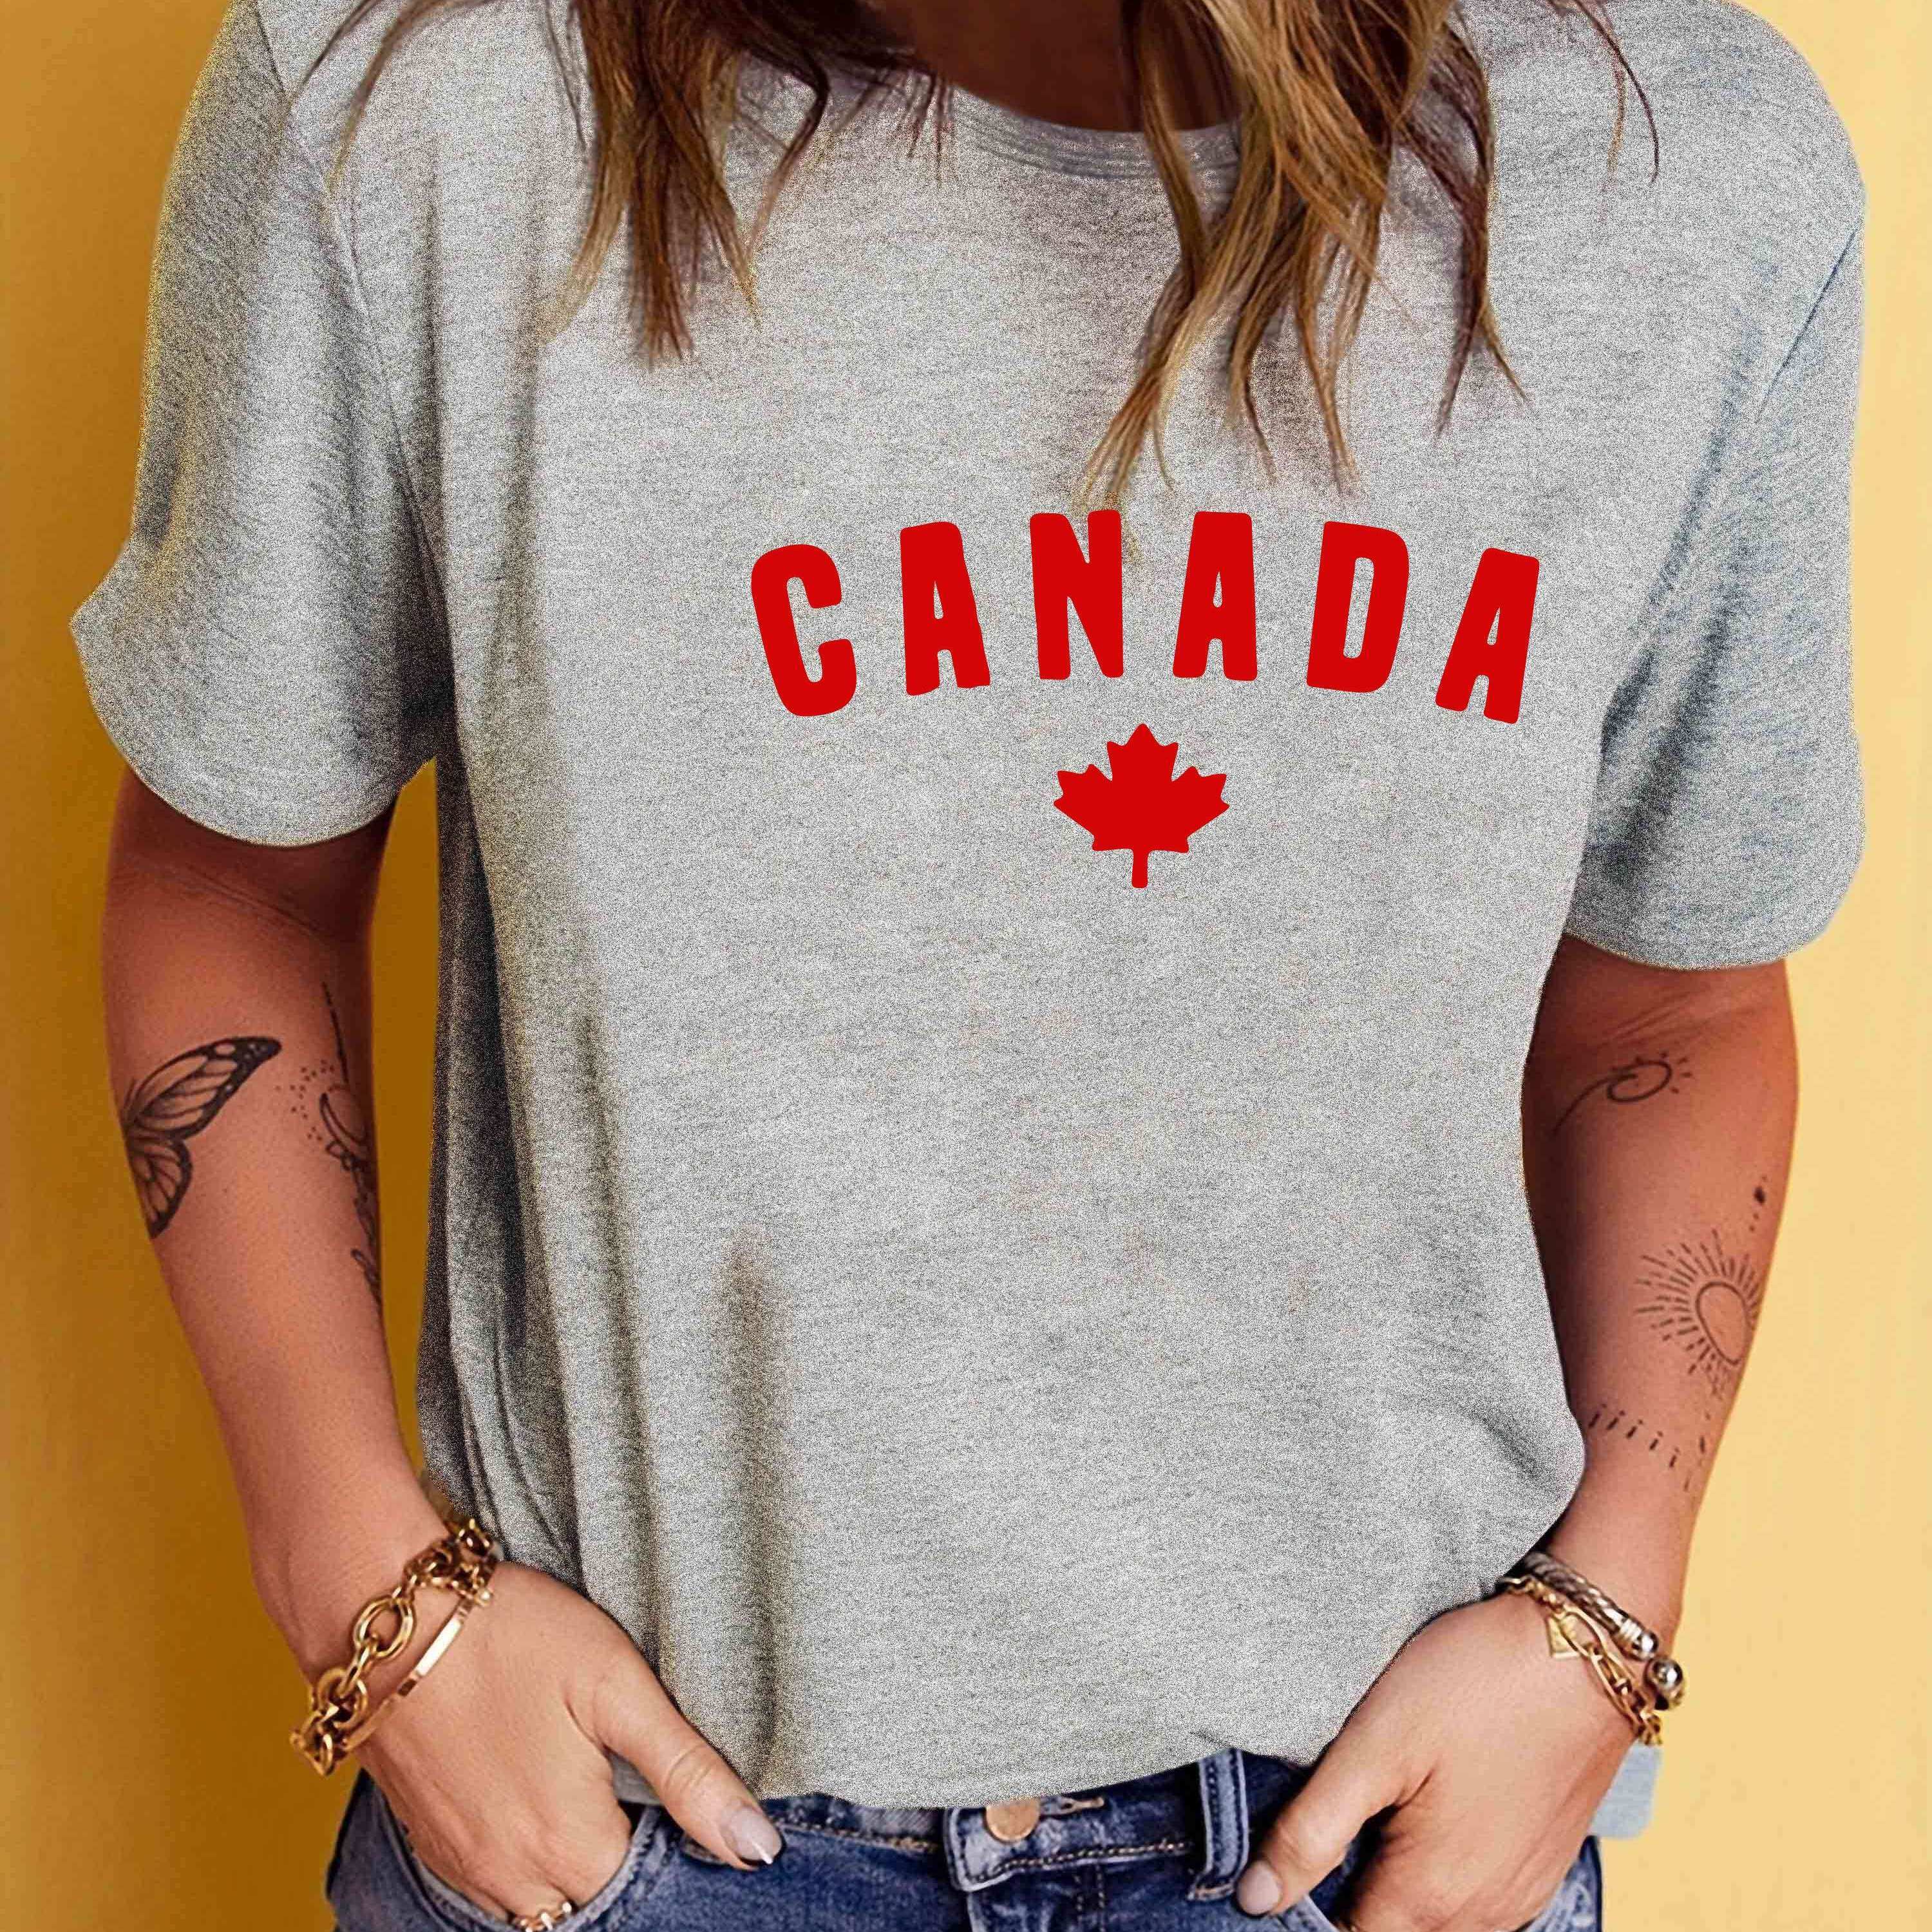 

Canada Print T-shirt, Short Sleeve Crew Neck Casual Top For Summer & Spring, Women's Clothing